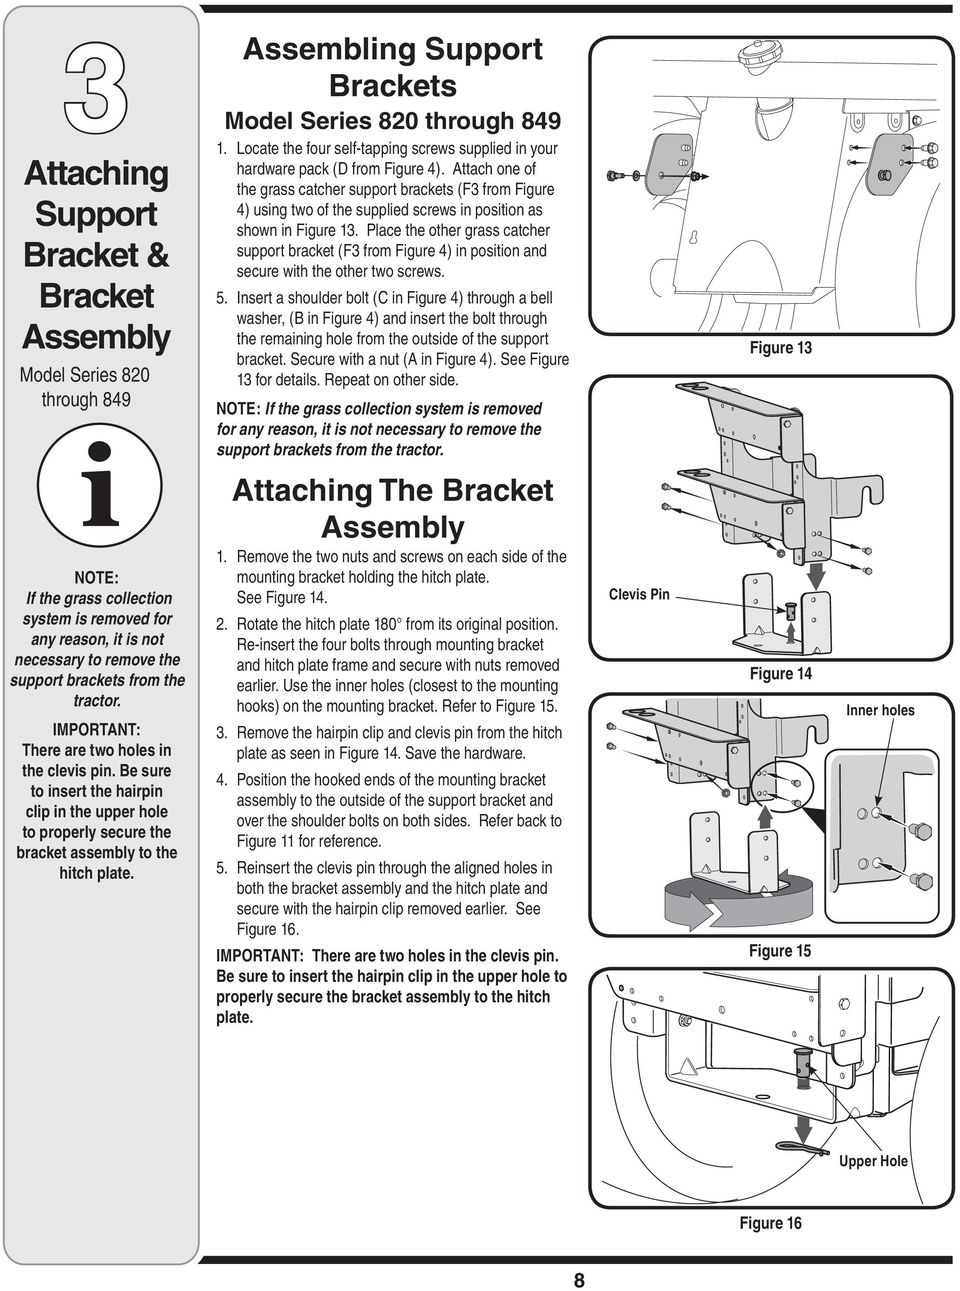 Attach one of the grass catcher support brackets (F3 from Figure 4) using two of the supplied screws in position as shown in Figure 13.